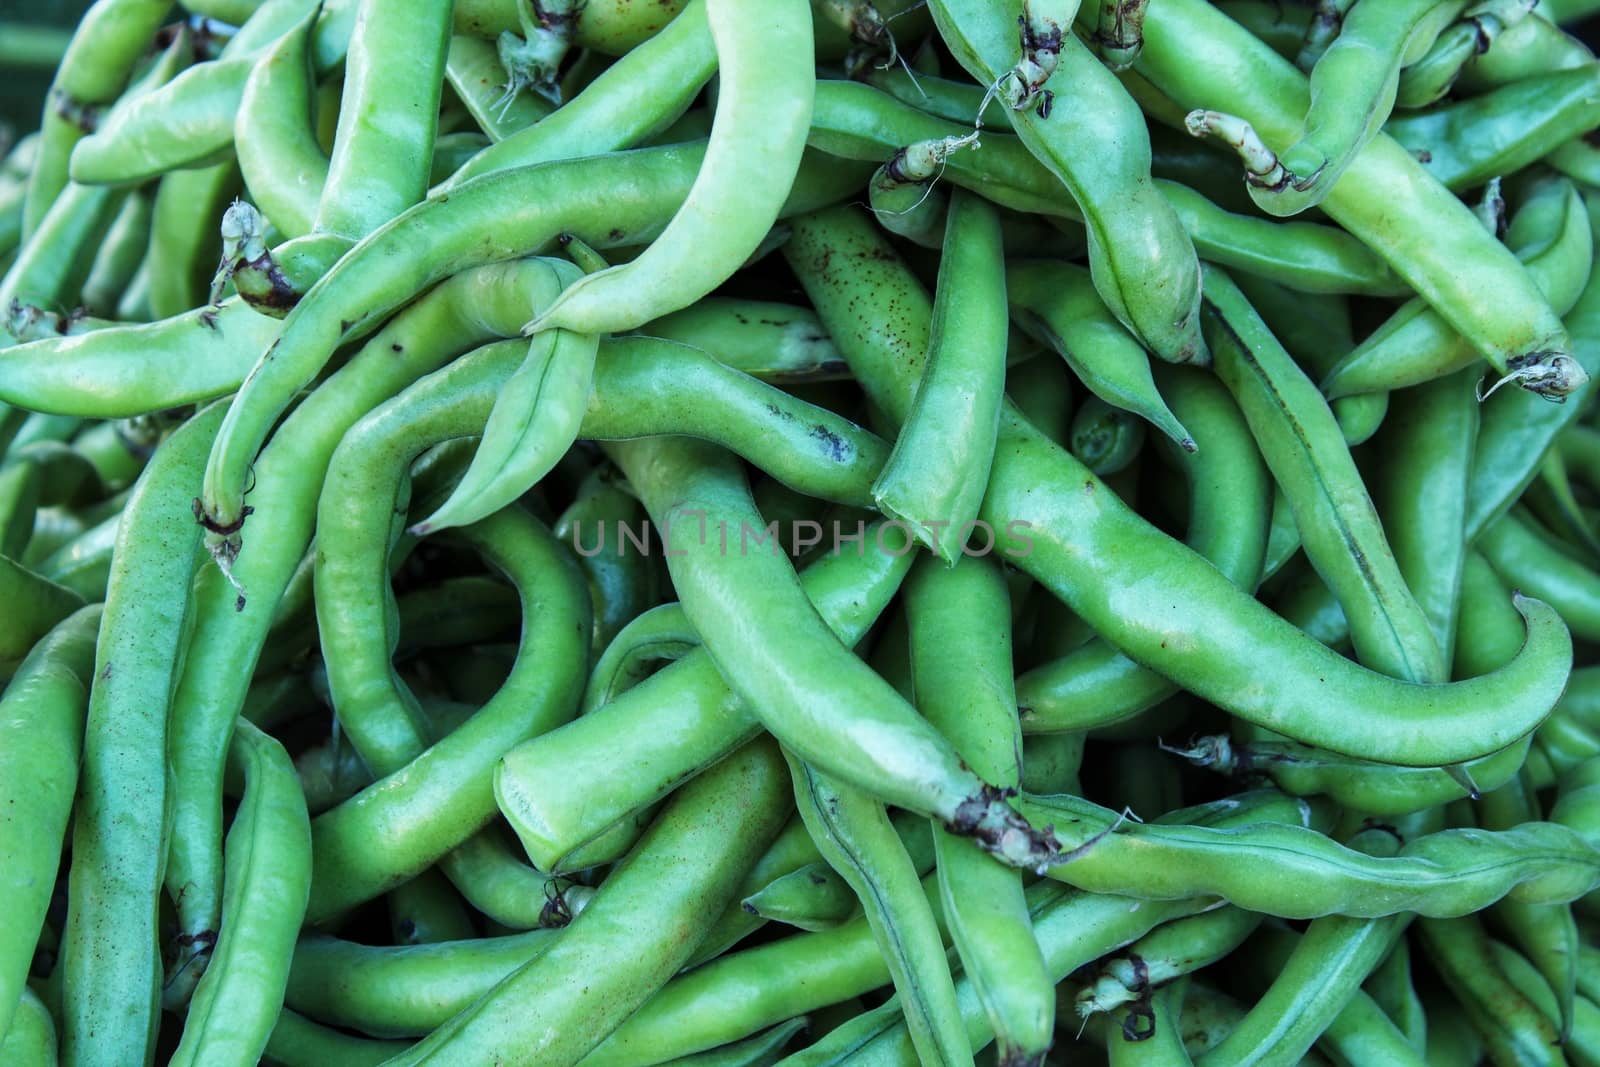 Broad beans for sale at a farmer market stall in Spain